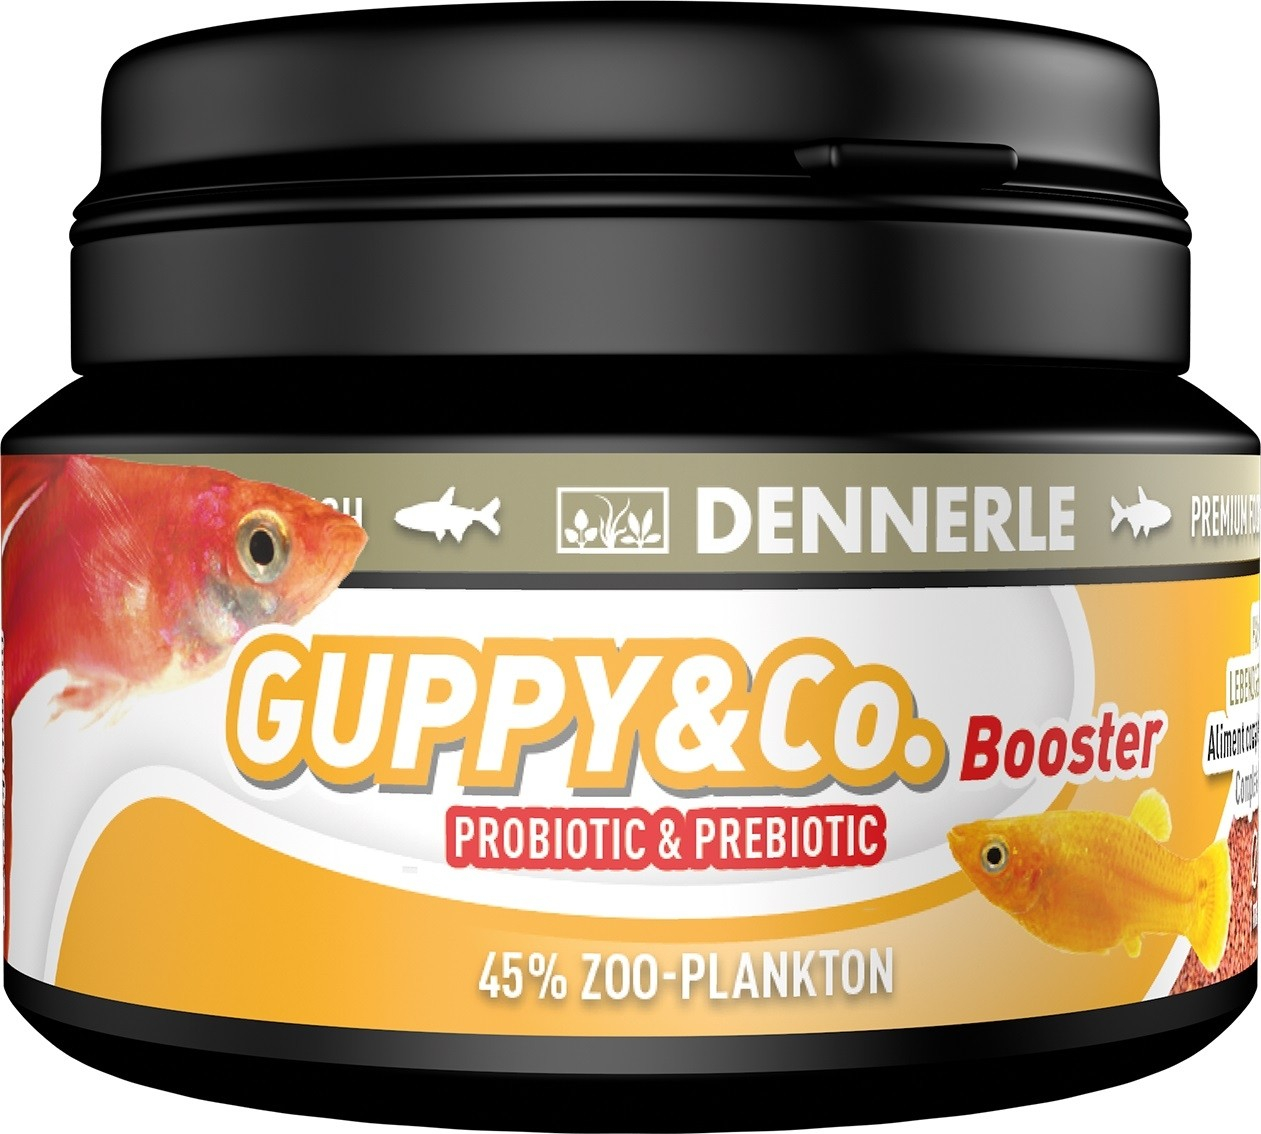 Dennerle Guppy & Co Booster Alimento para guppies